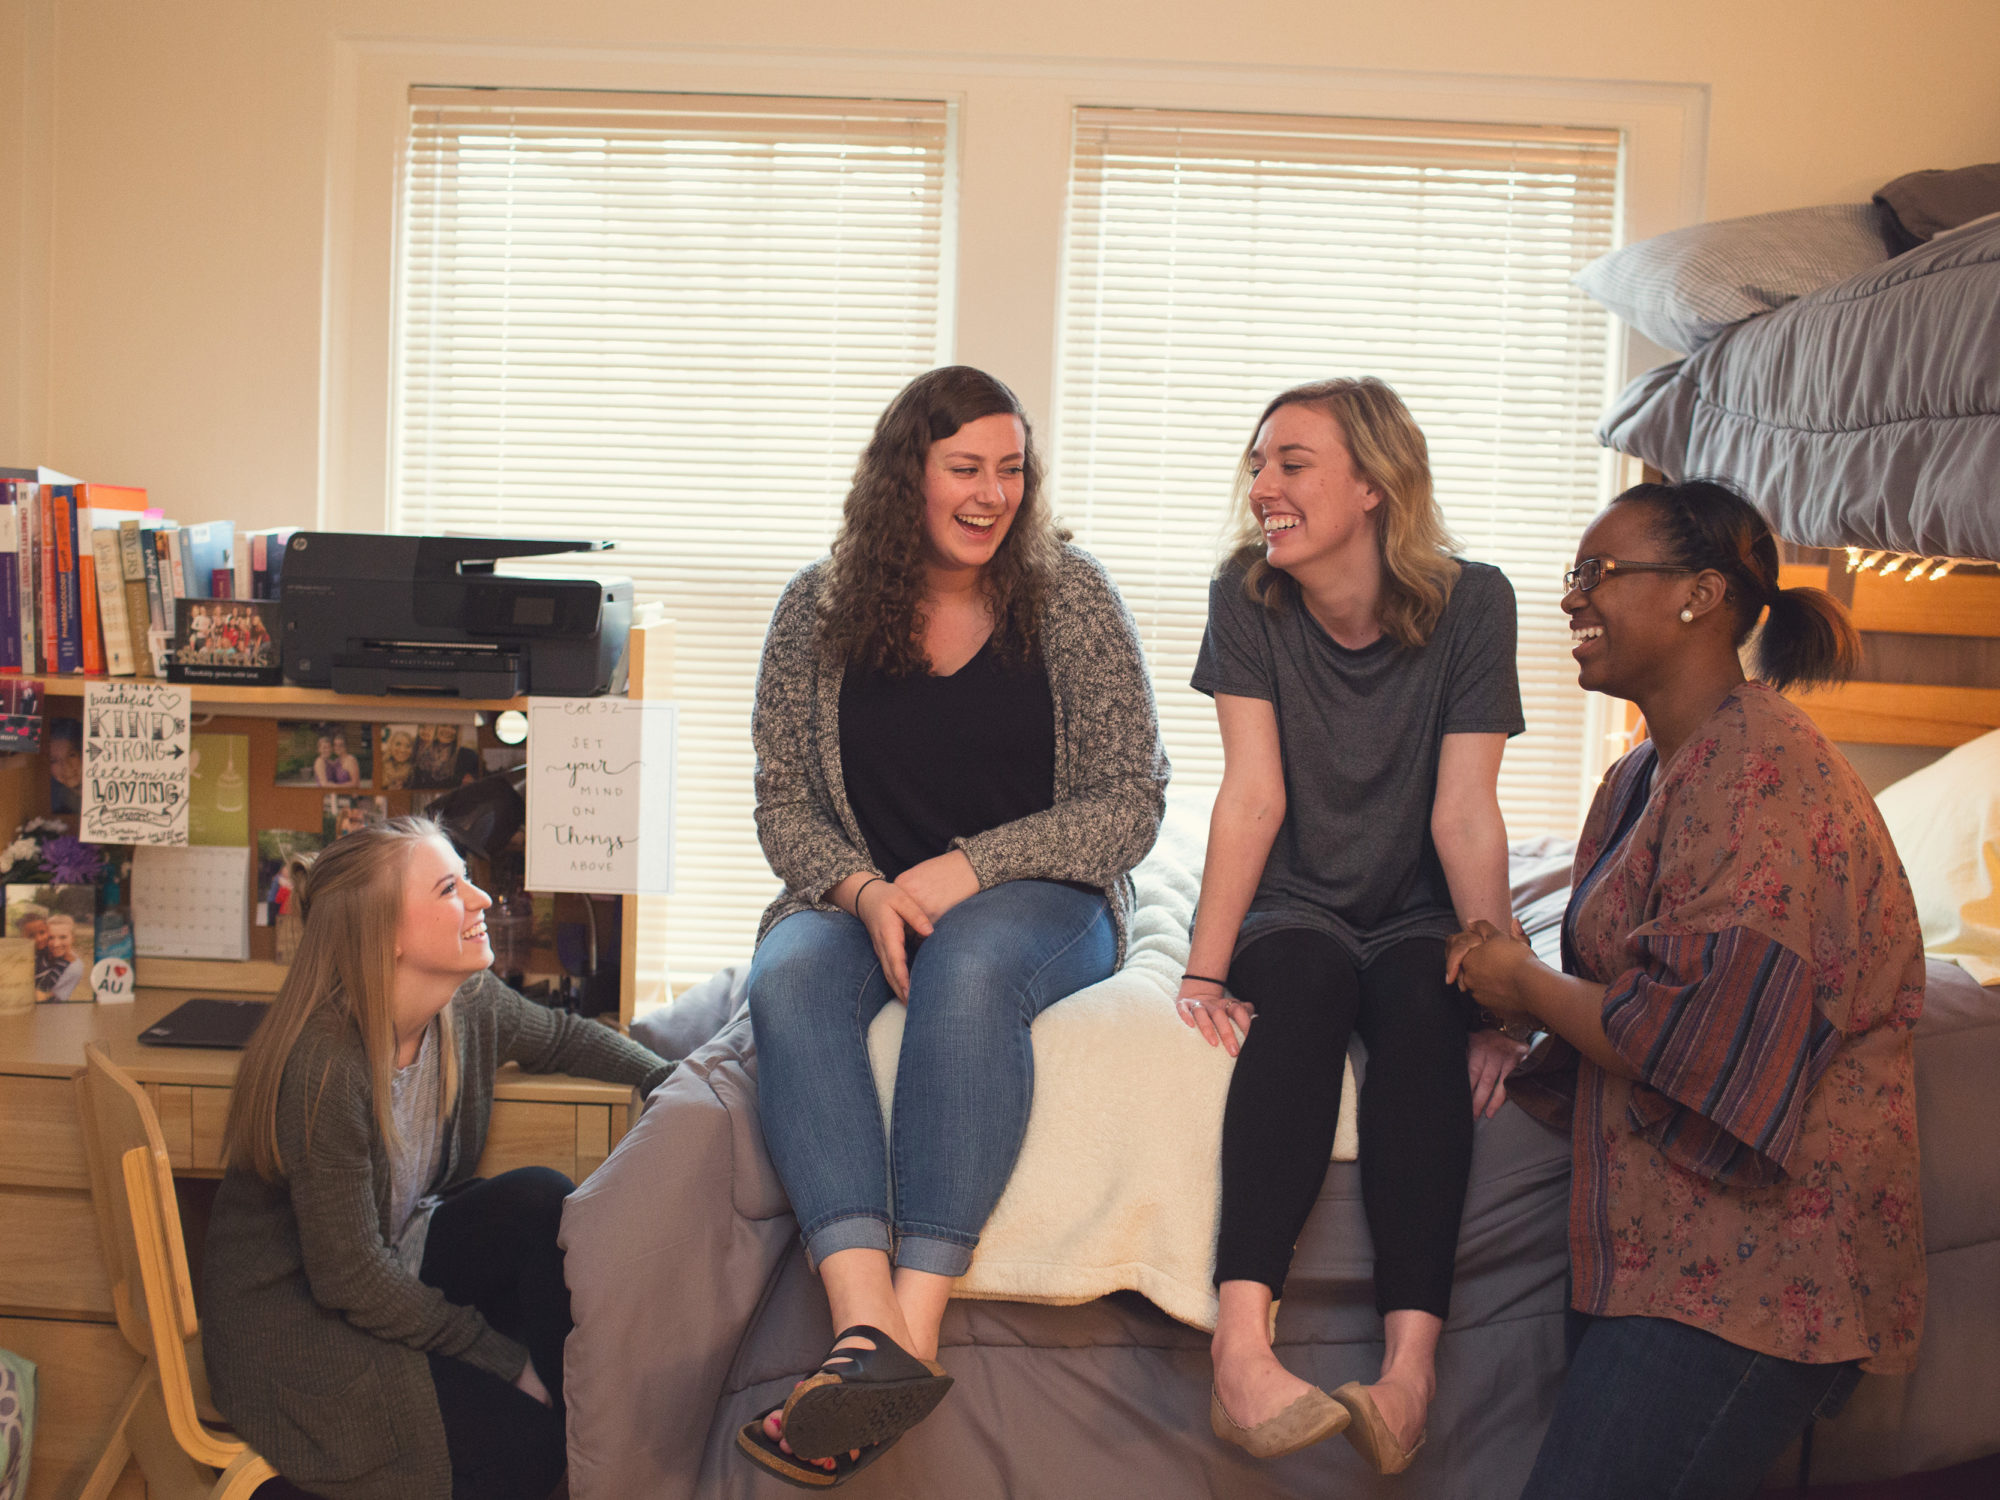 4 female students relaxing and talking in dorm room